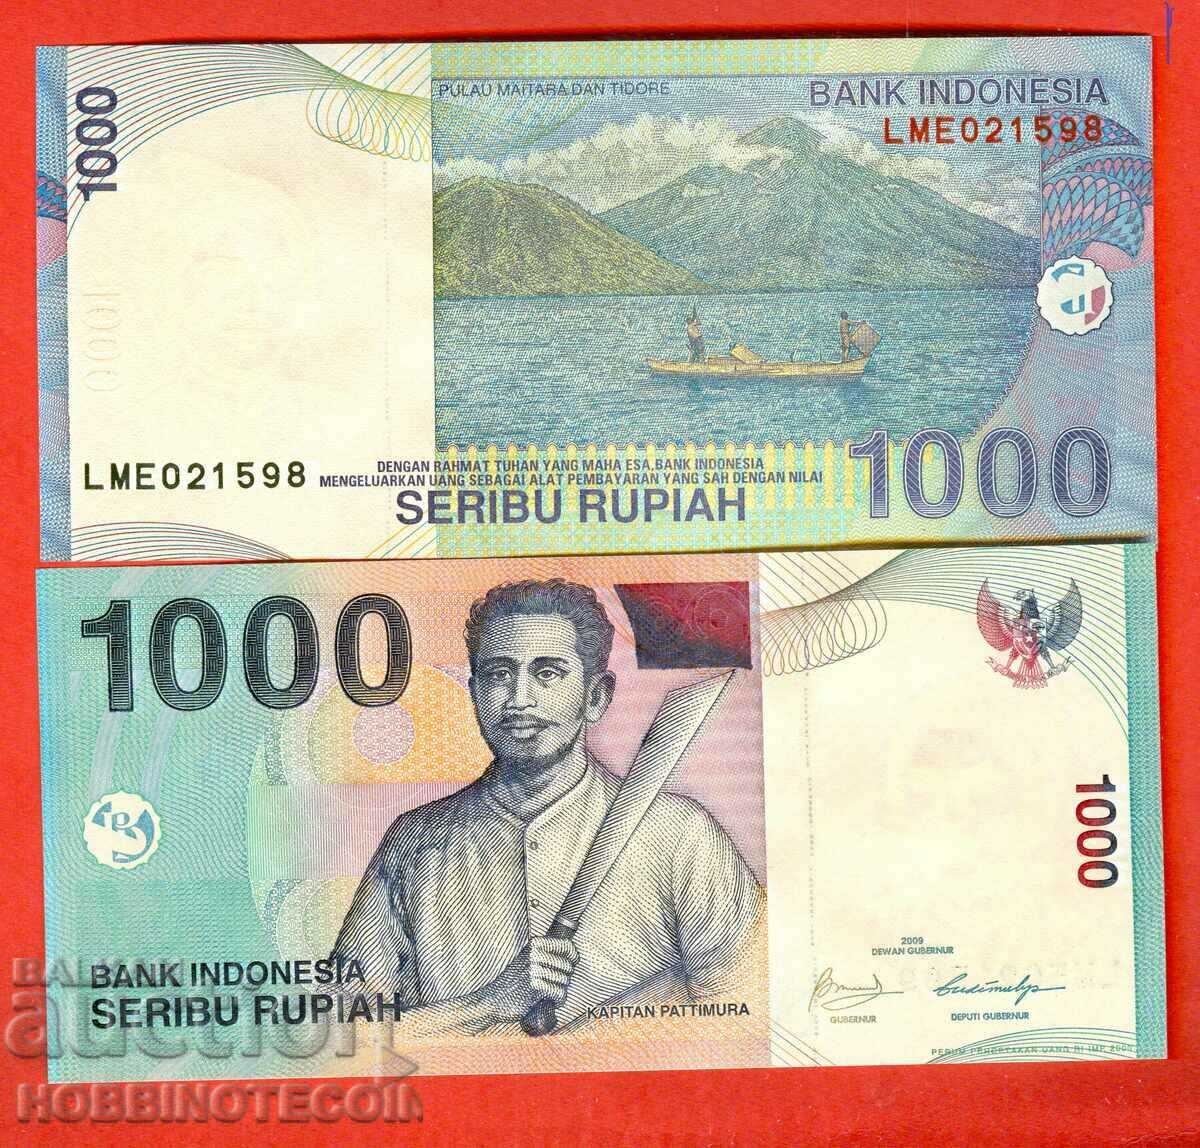 INDONESIA INDONESIA 1000 issue issue 2000 2009 LME NEW UNC